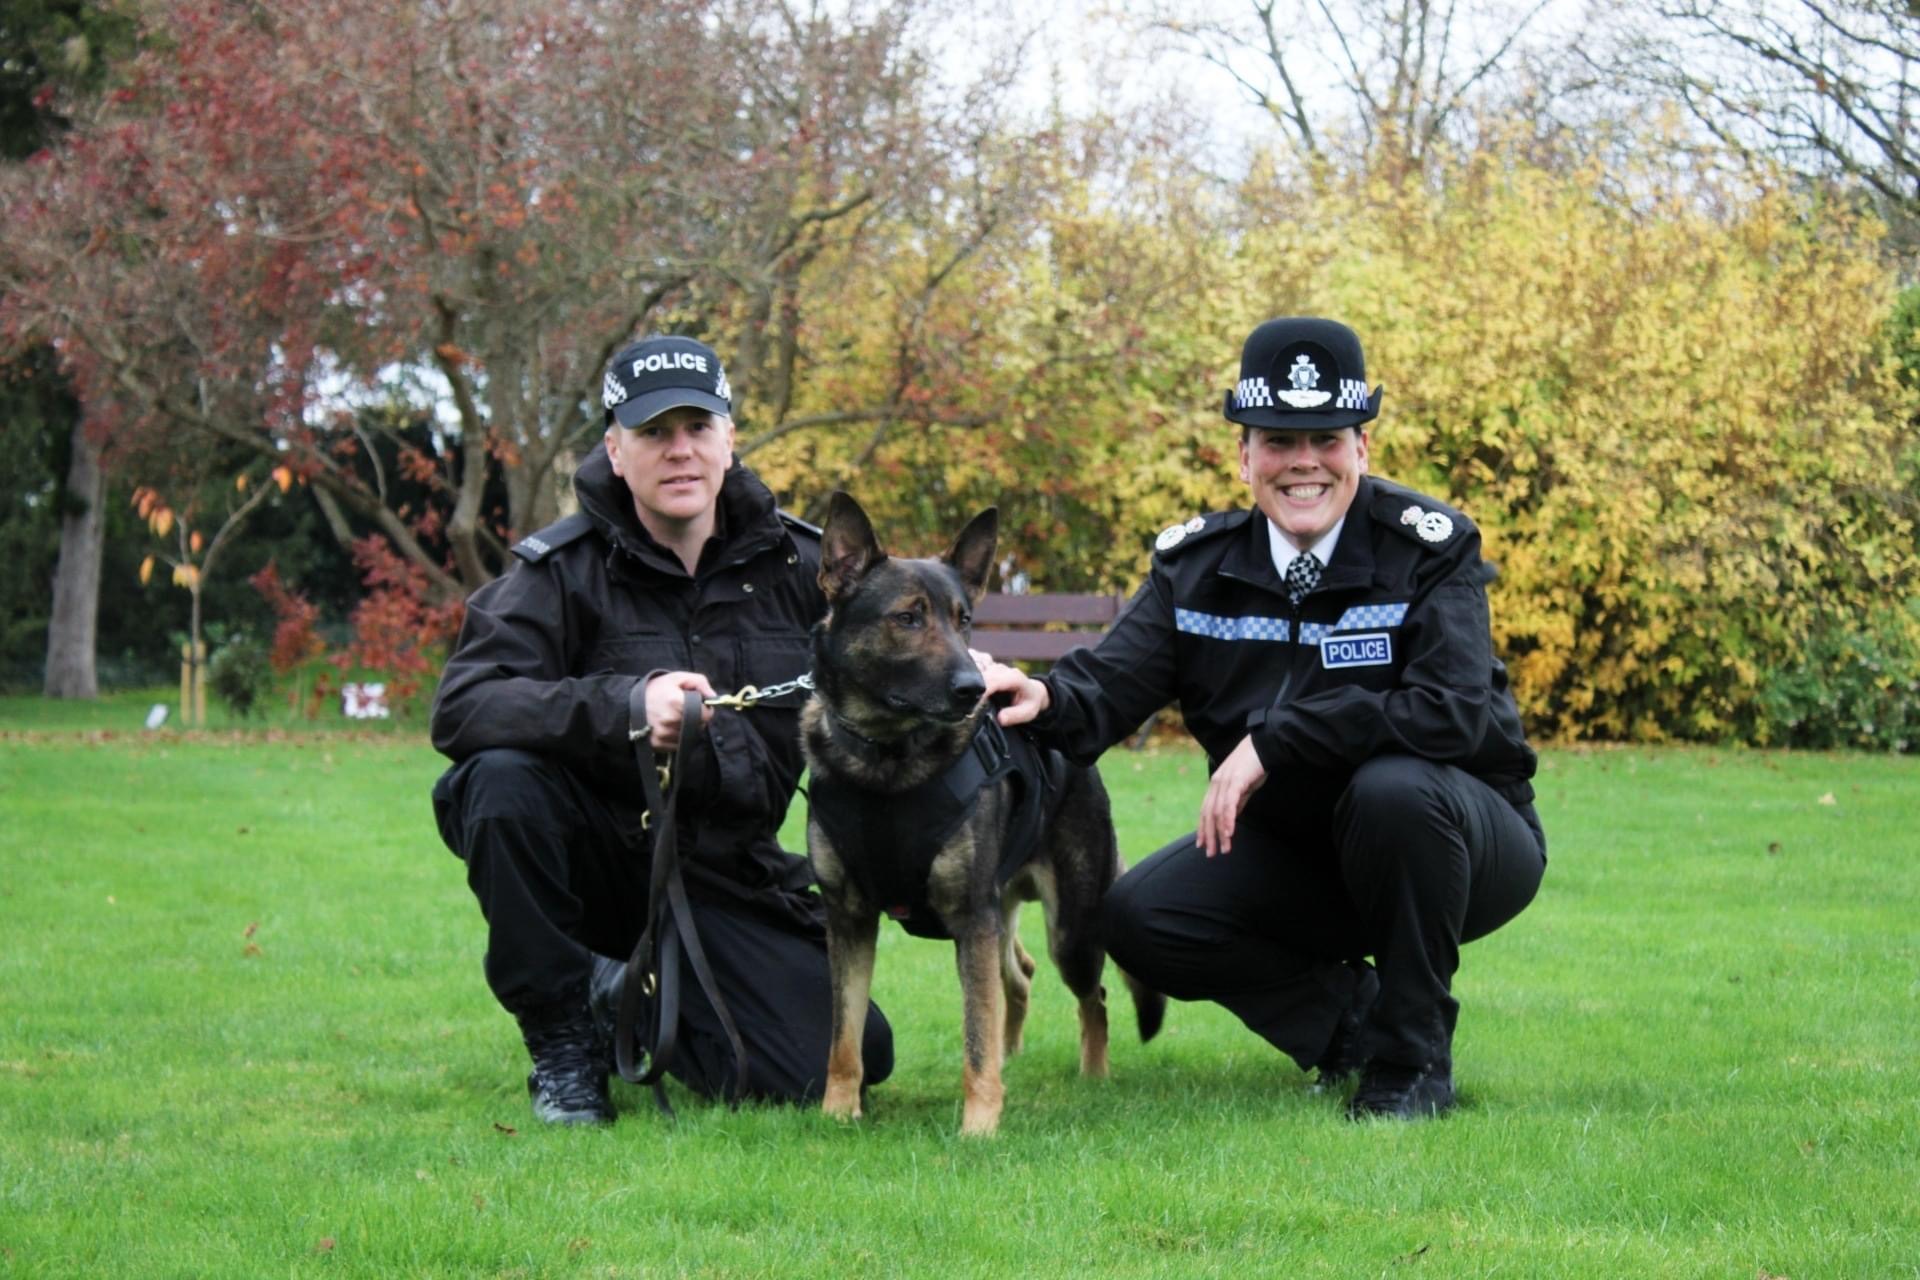 NEWS | West Mercia Police has issued police dogs with vests to help protect them from weapons and the impact from objects